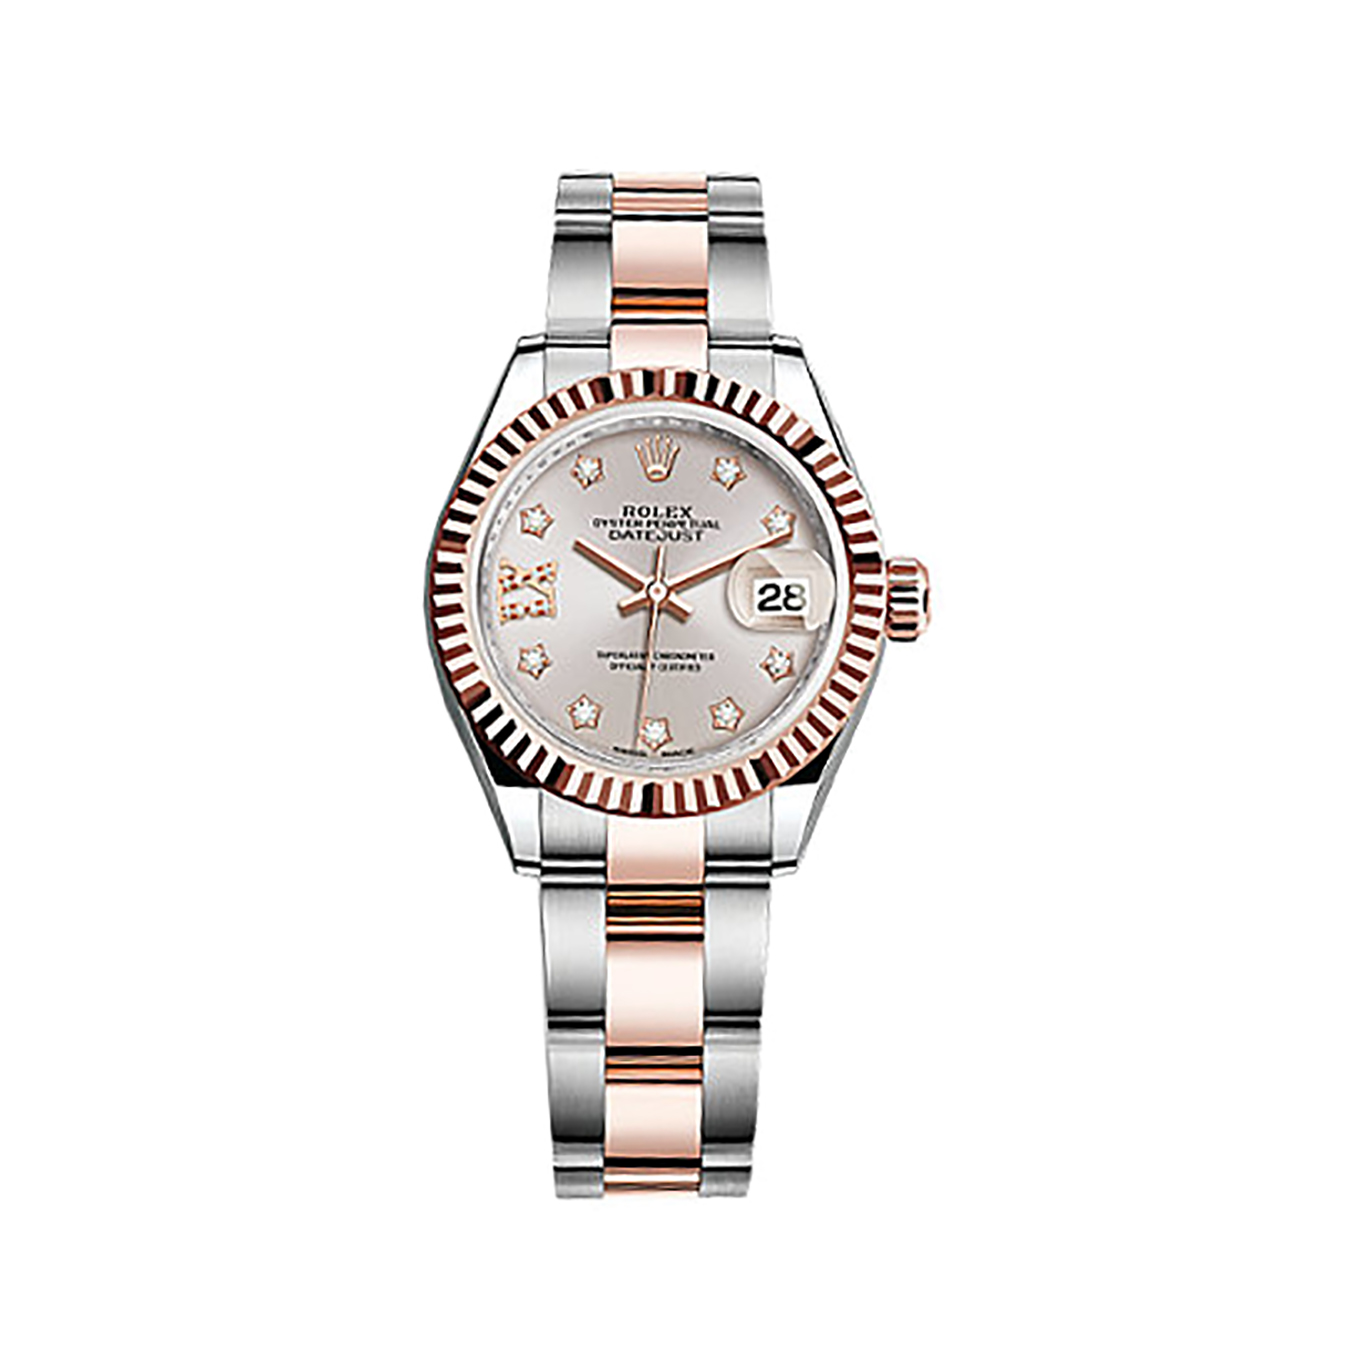 Lady-Datejust 28 279171 Rose Gold & Stainless Steel Watch (Sundust Set with Diamonds)